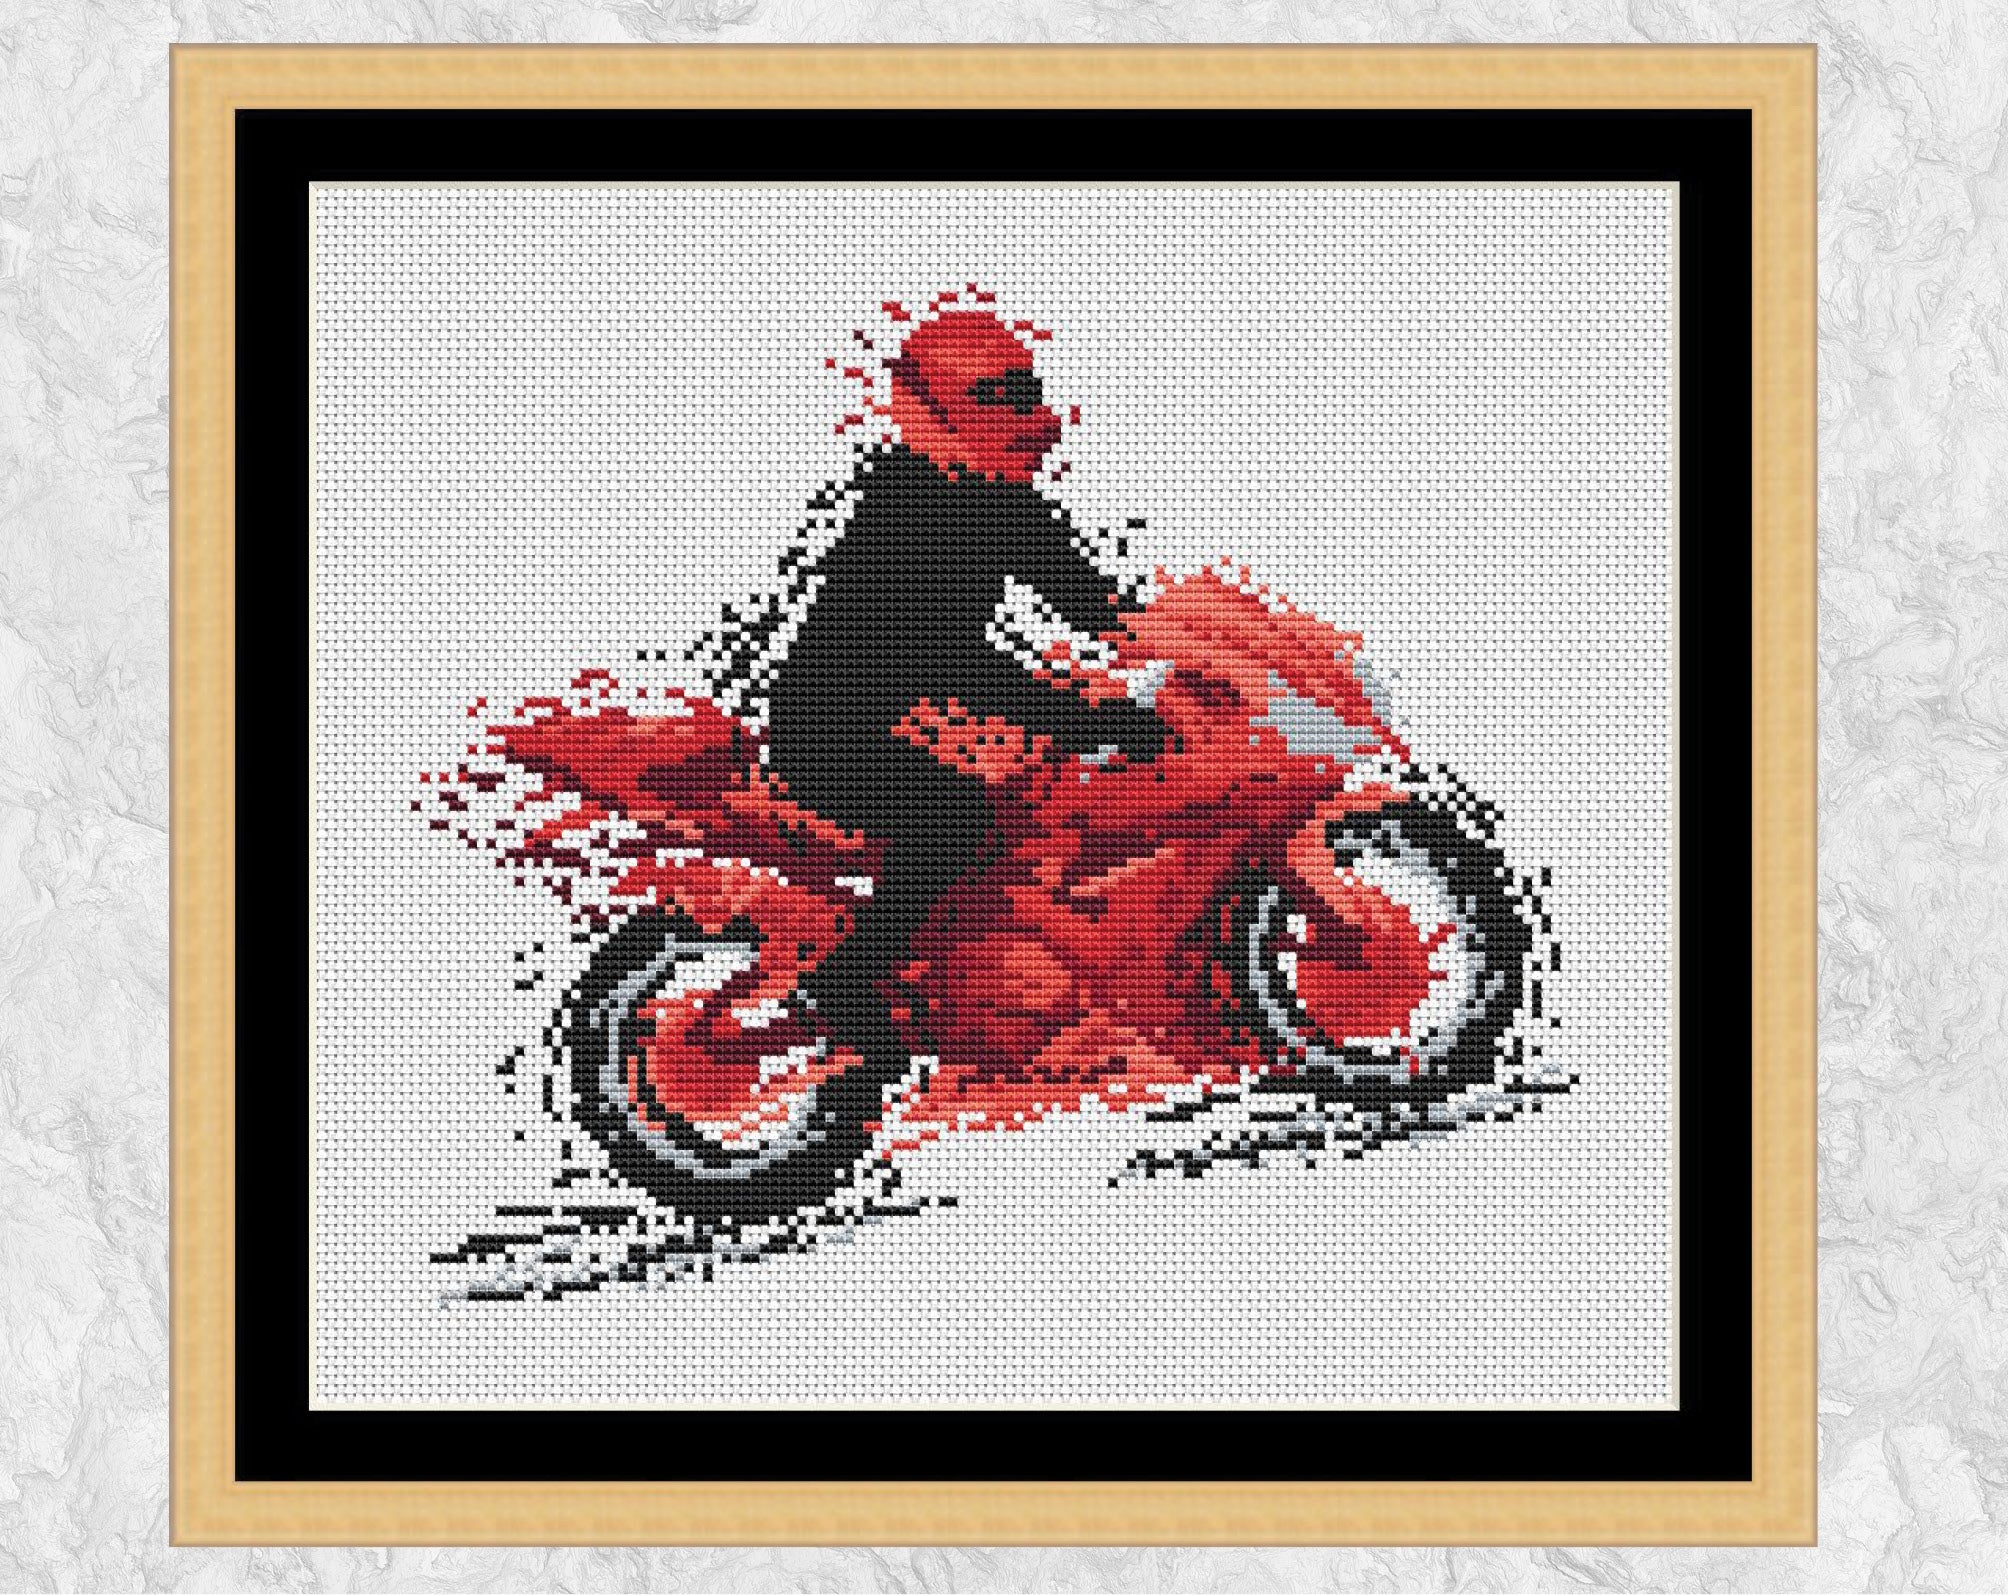 Modern art motorbike cross stitch pattern. The silhouette of a motorcyclist on a red motorbike, all in splattered paint style. Shown in frame with black mount.